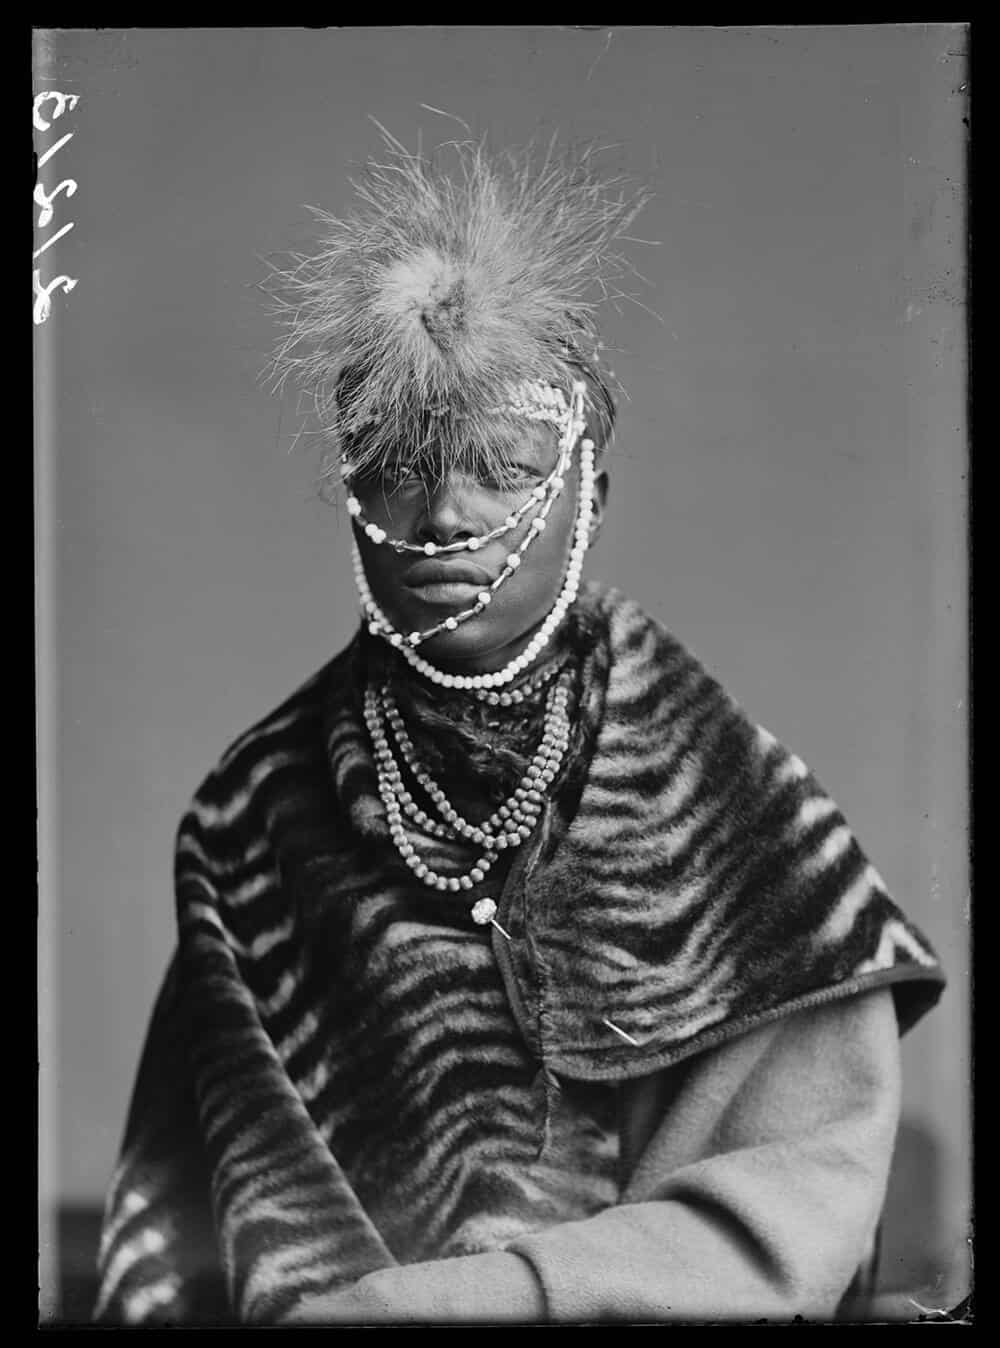 Wellington Majiza, The African Choir. London, 1891. By London Stereoscopic Company. © Hulton Archive/Getty Images. Courtesy of Hulton Archive, and Autograph ABP, London.